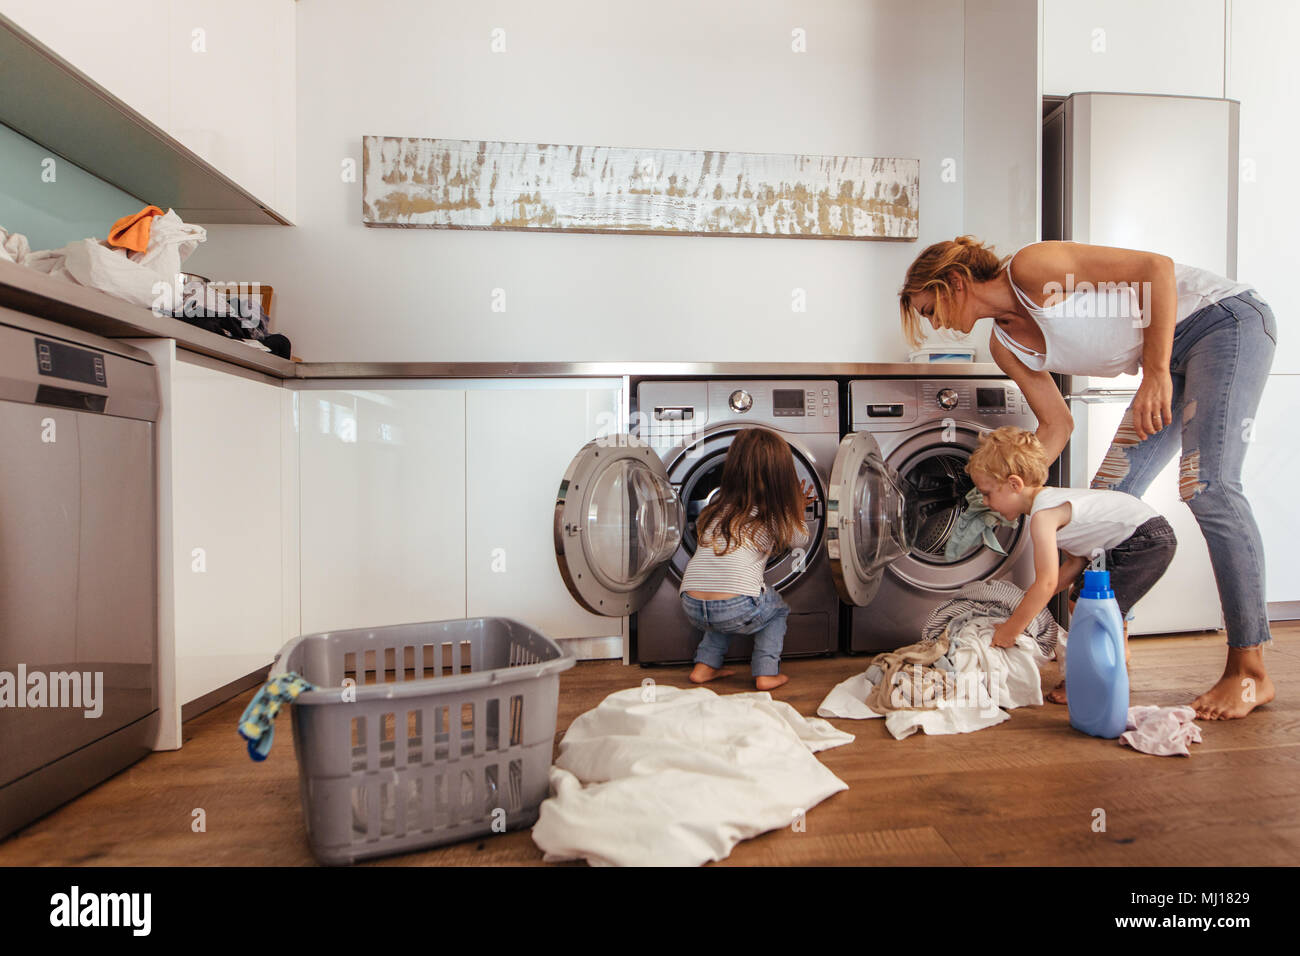 Woman with kids load clothes in washing machine. Mother and children putting laundry into washing machine at home. Stock Photo